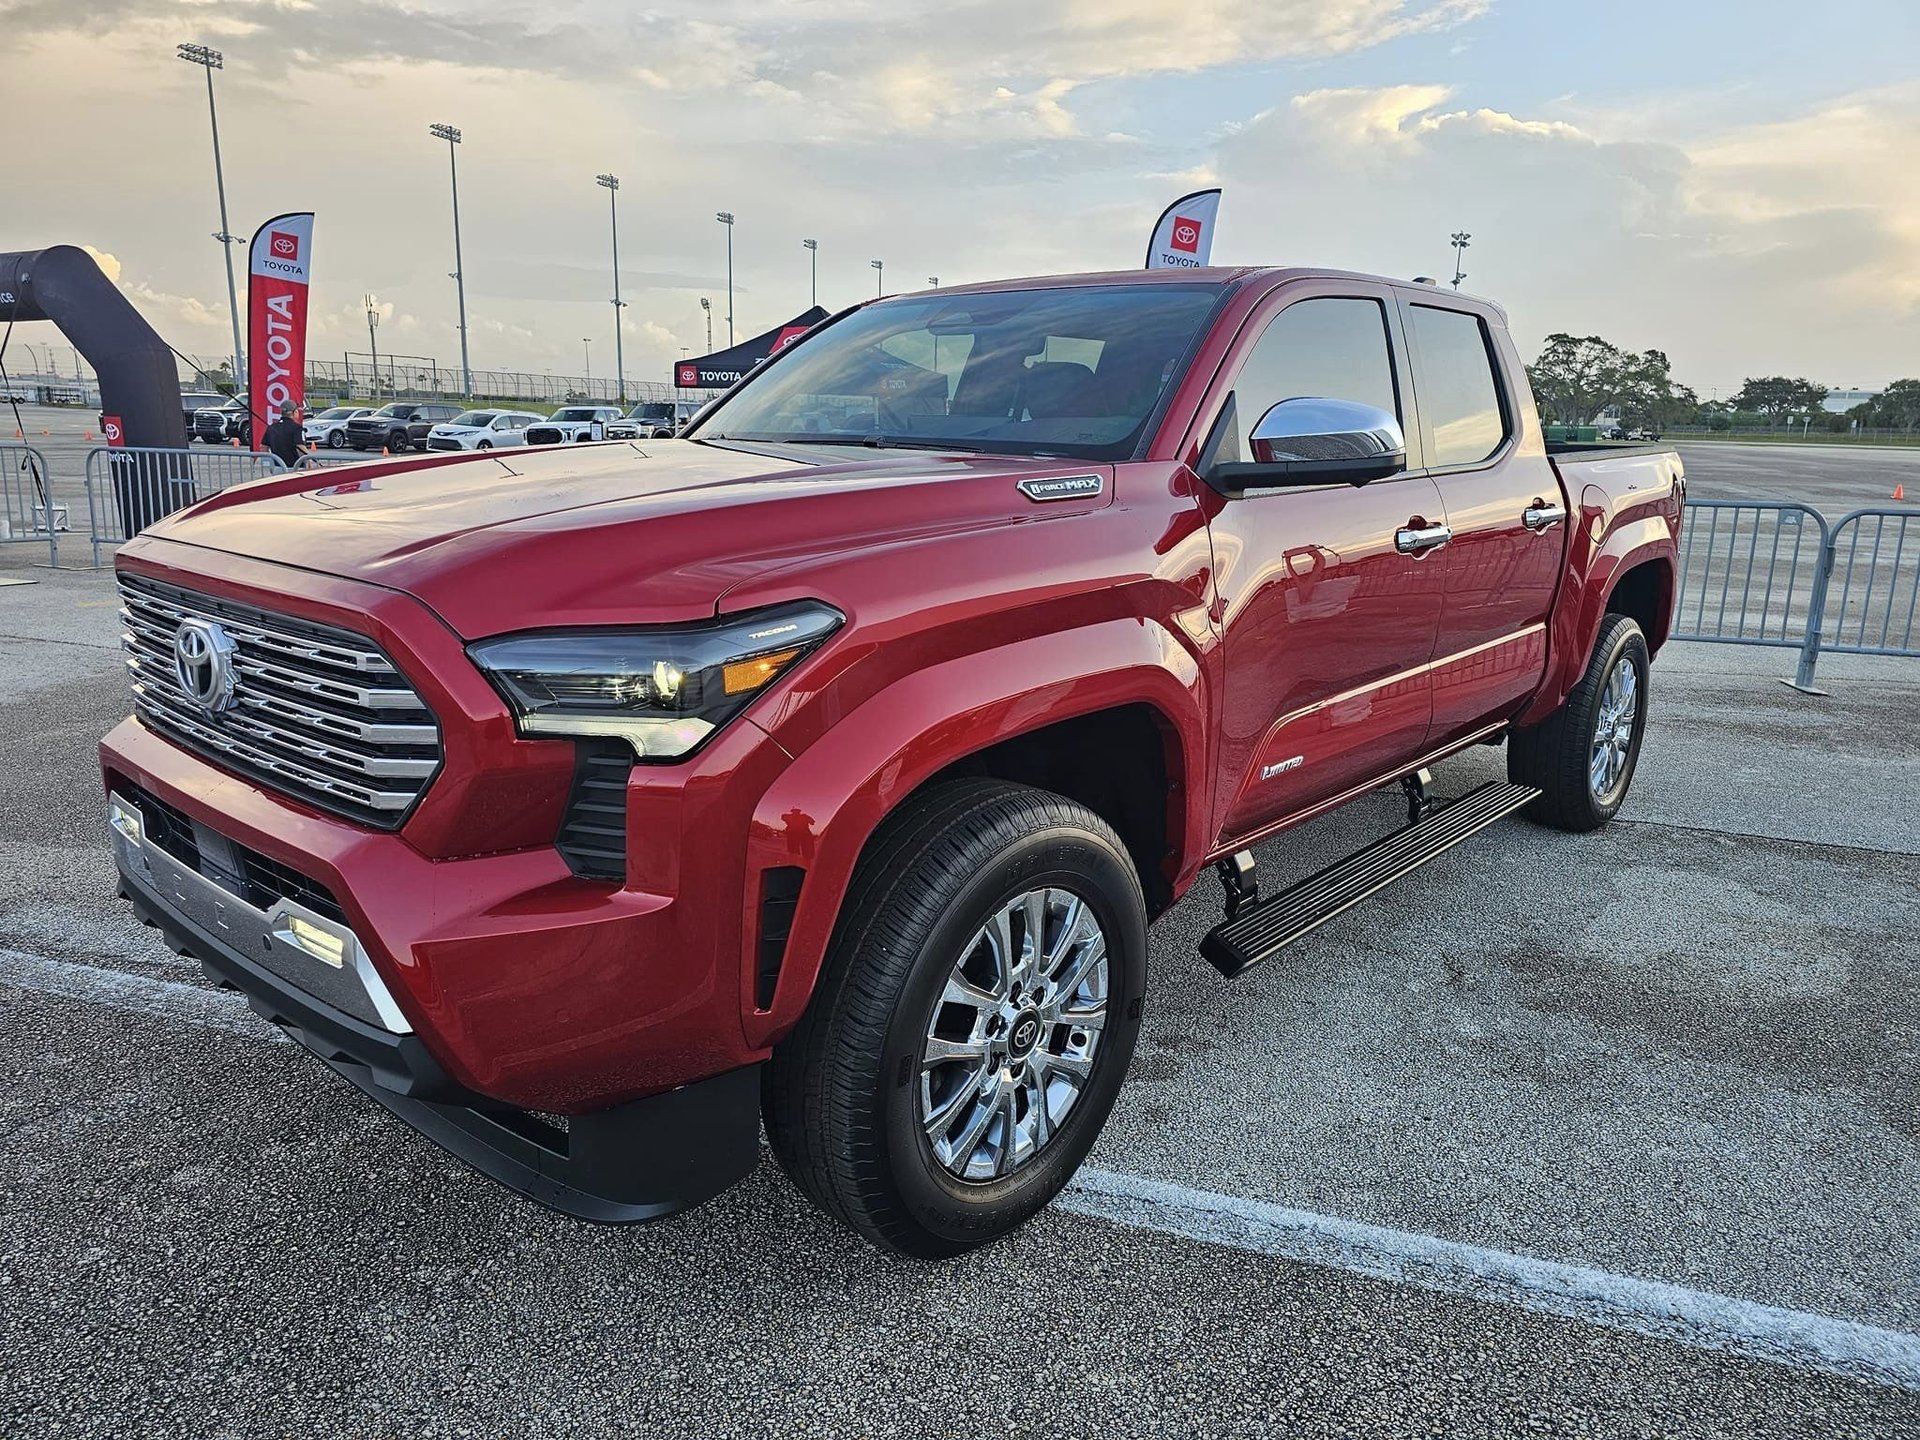 2024 Tacoma 2024 Tacoma Limited Specs, Price, MPG, Options/Packages, Features, Photos & Videos 380732152_10161079208957463_2923576371985940780_n-jpg.1362